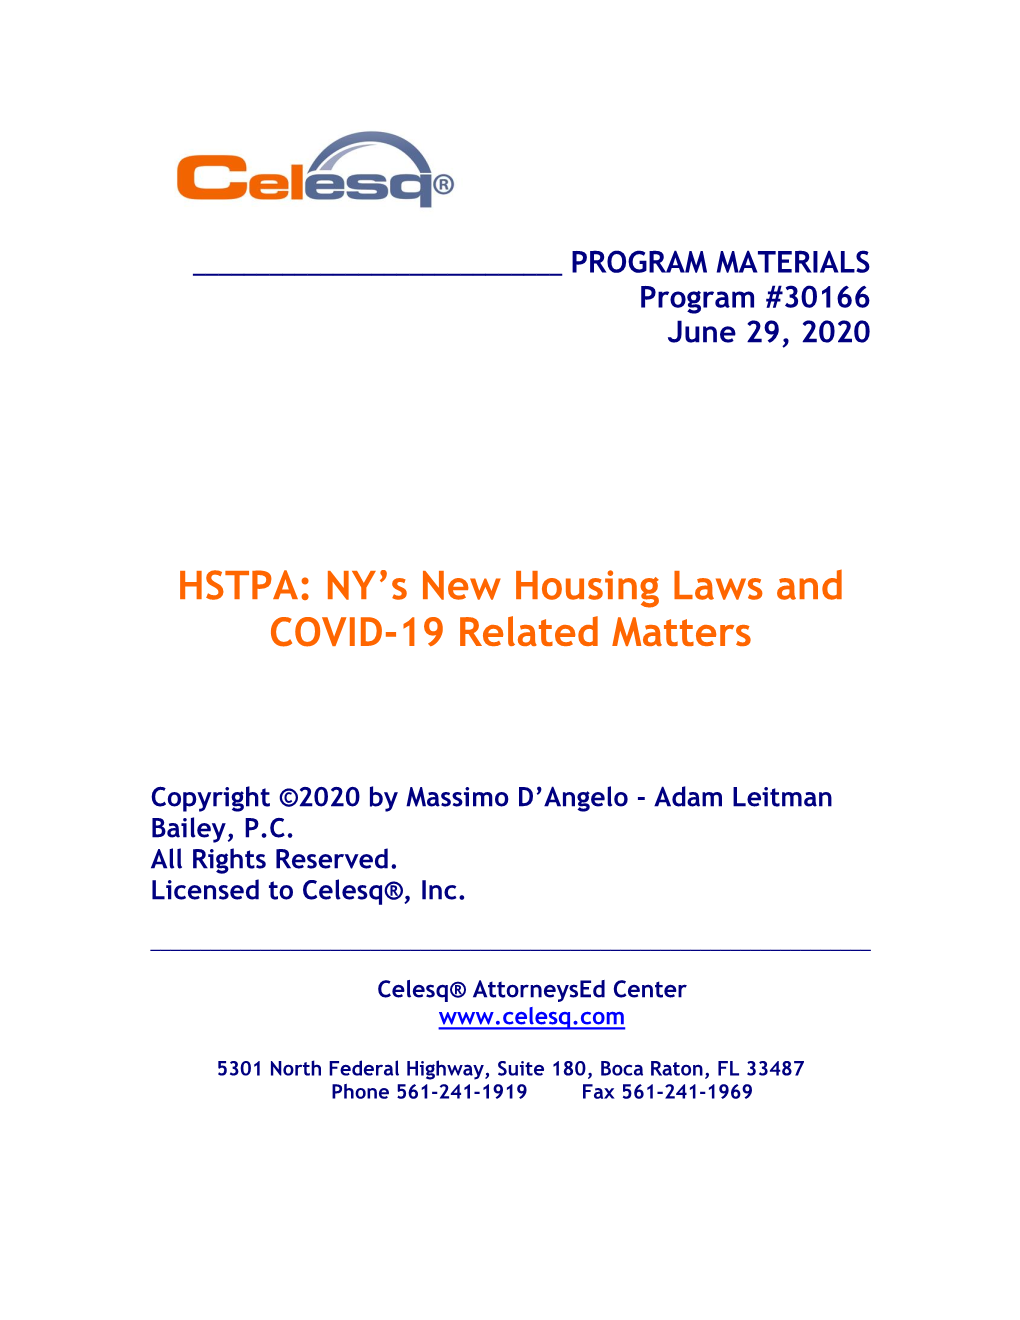 HSTPA: NY's New Housing Laws and COVID-19 Related Matters